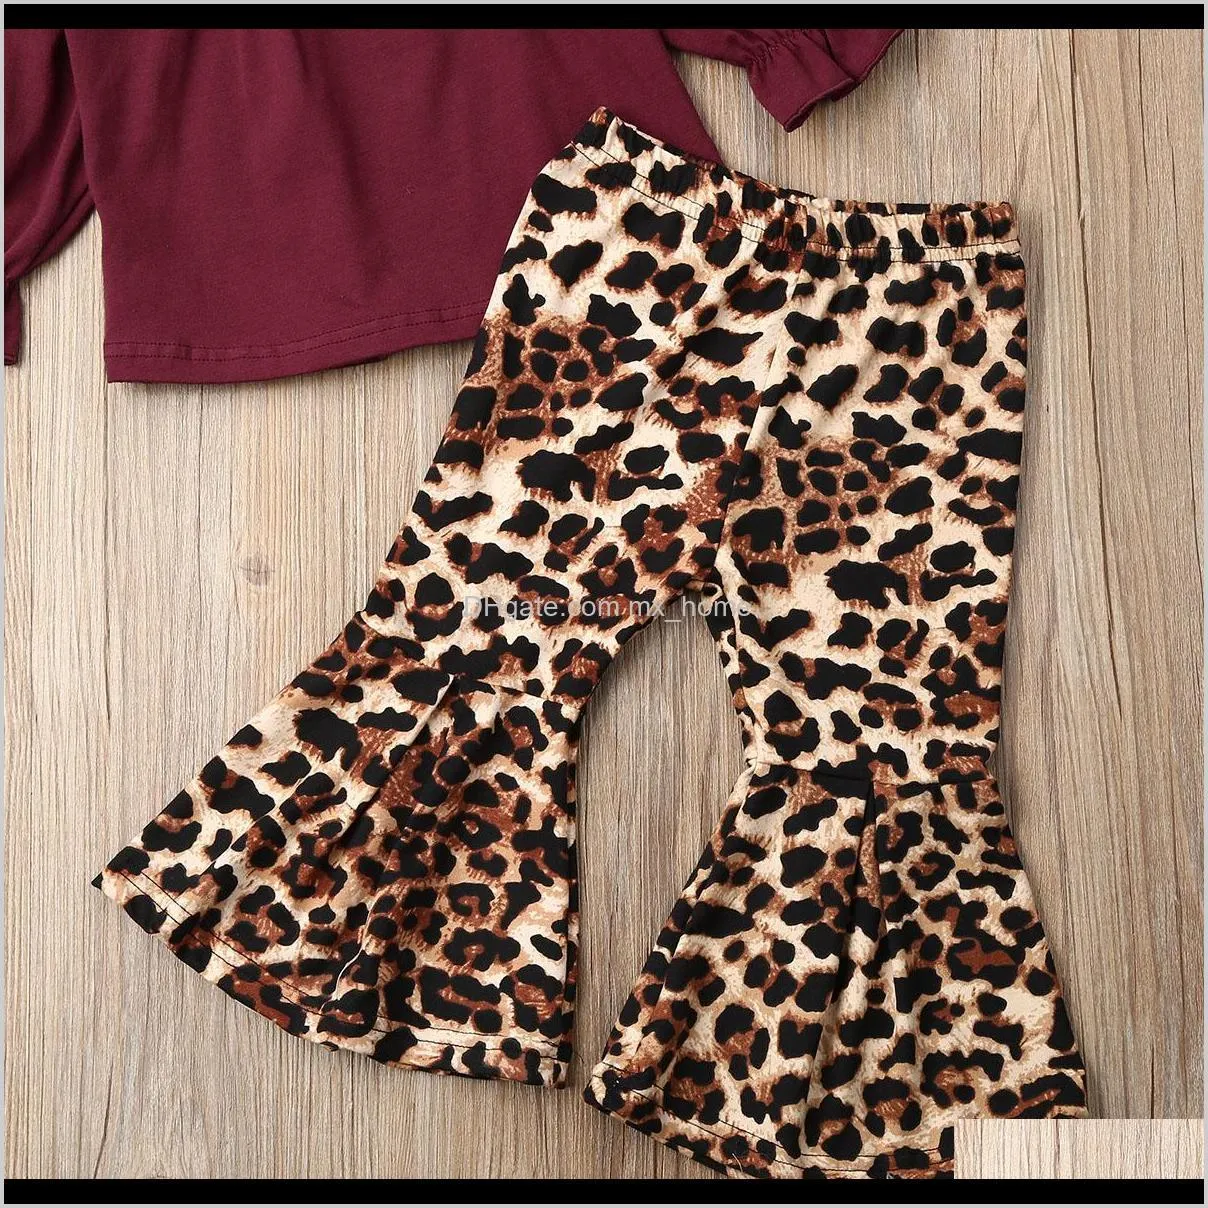 2pcs infant baby girl t-shirt outfits long sleeve tops leopard pants clothes set